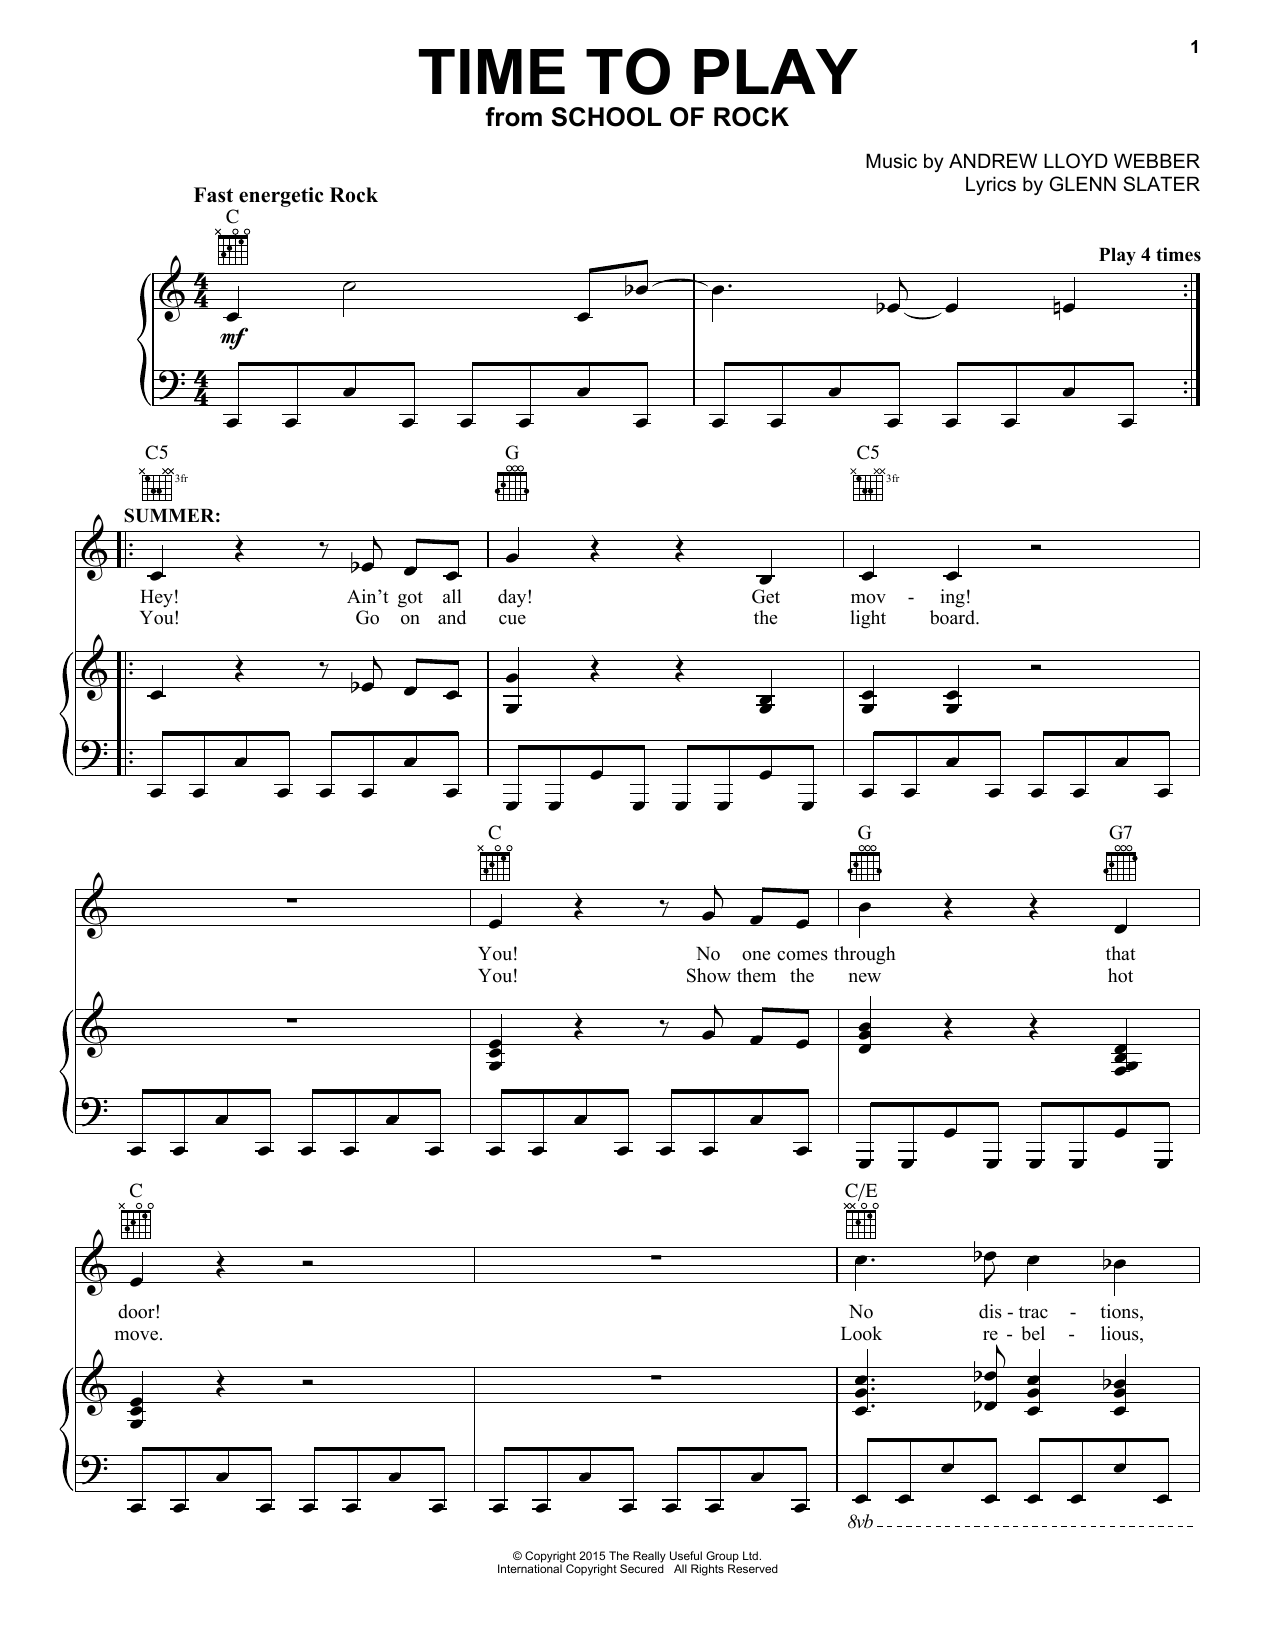 Download Andrew Lloyd Webber Time To Play (from School of Rock: The Sheet Music